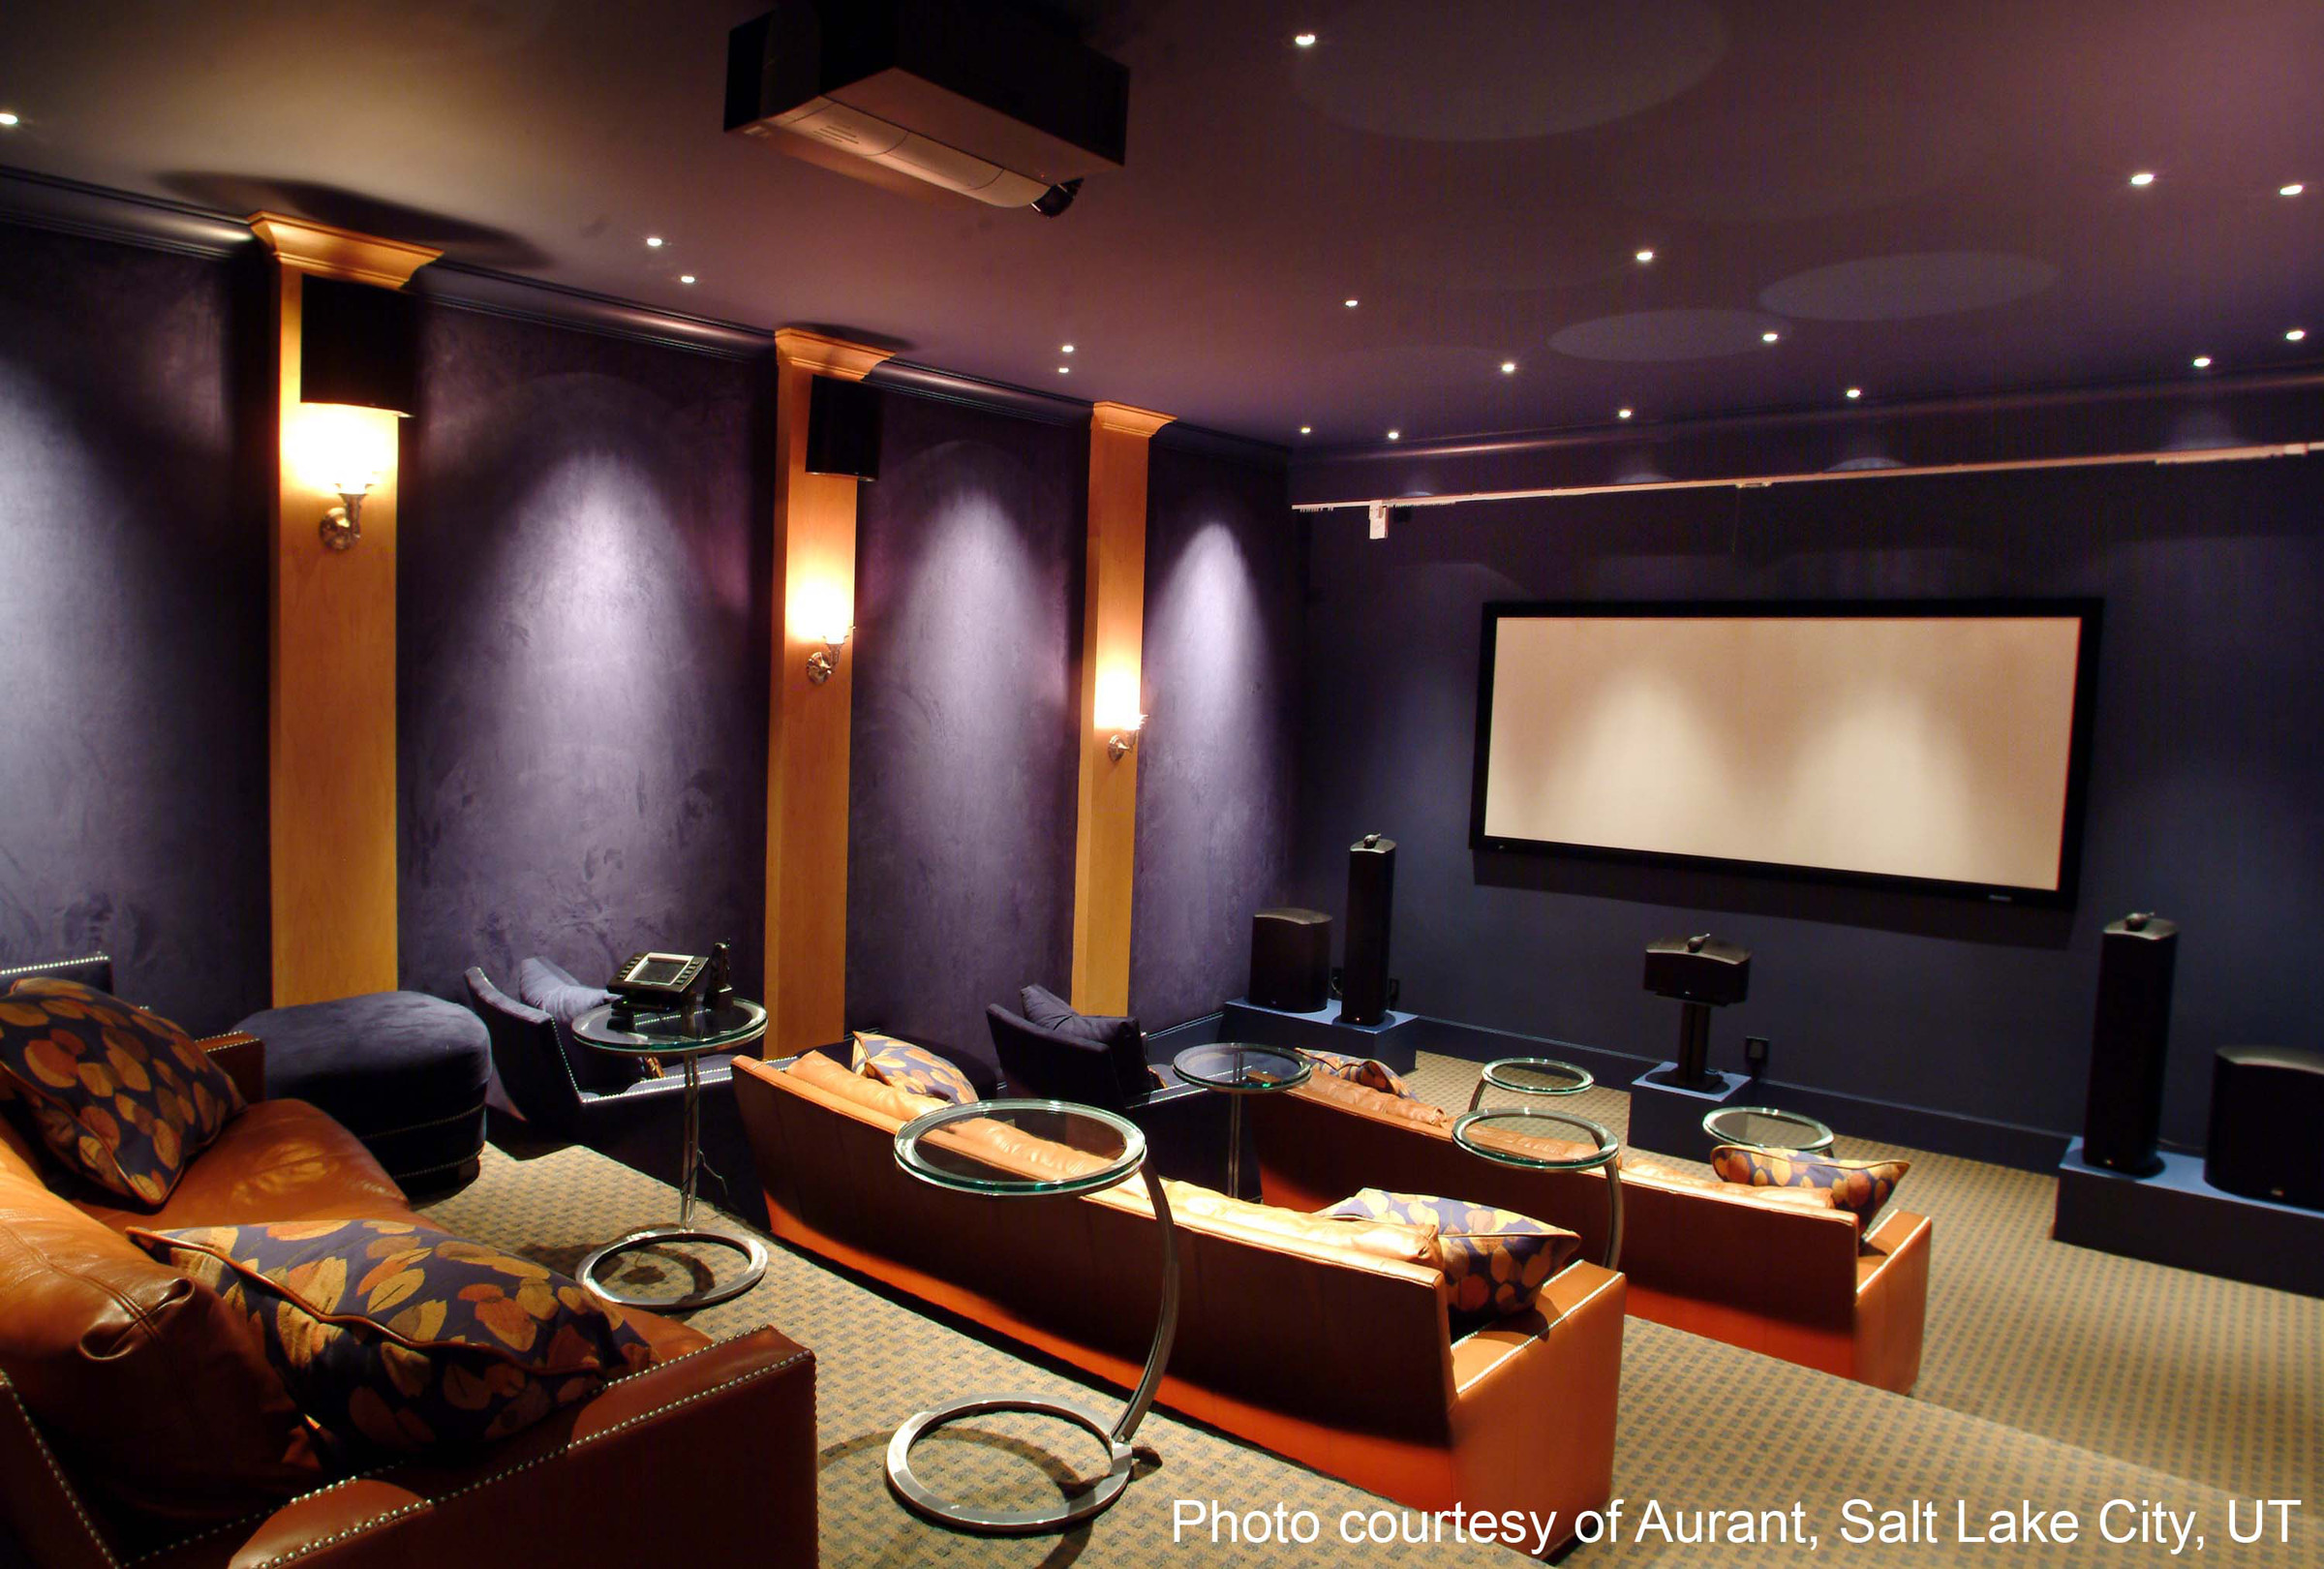 How To Build a Home Theater - Valencia Theater Seating